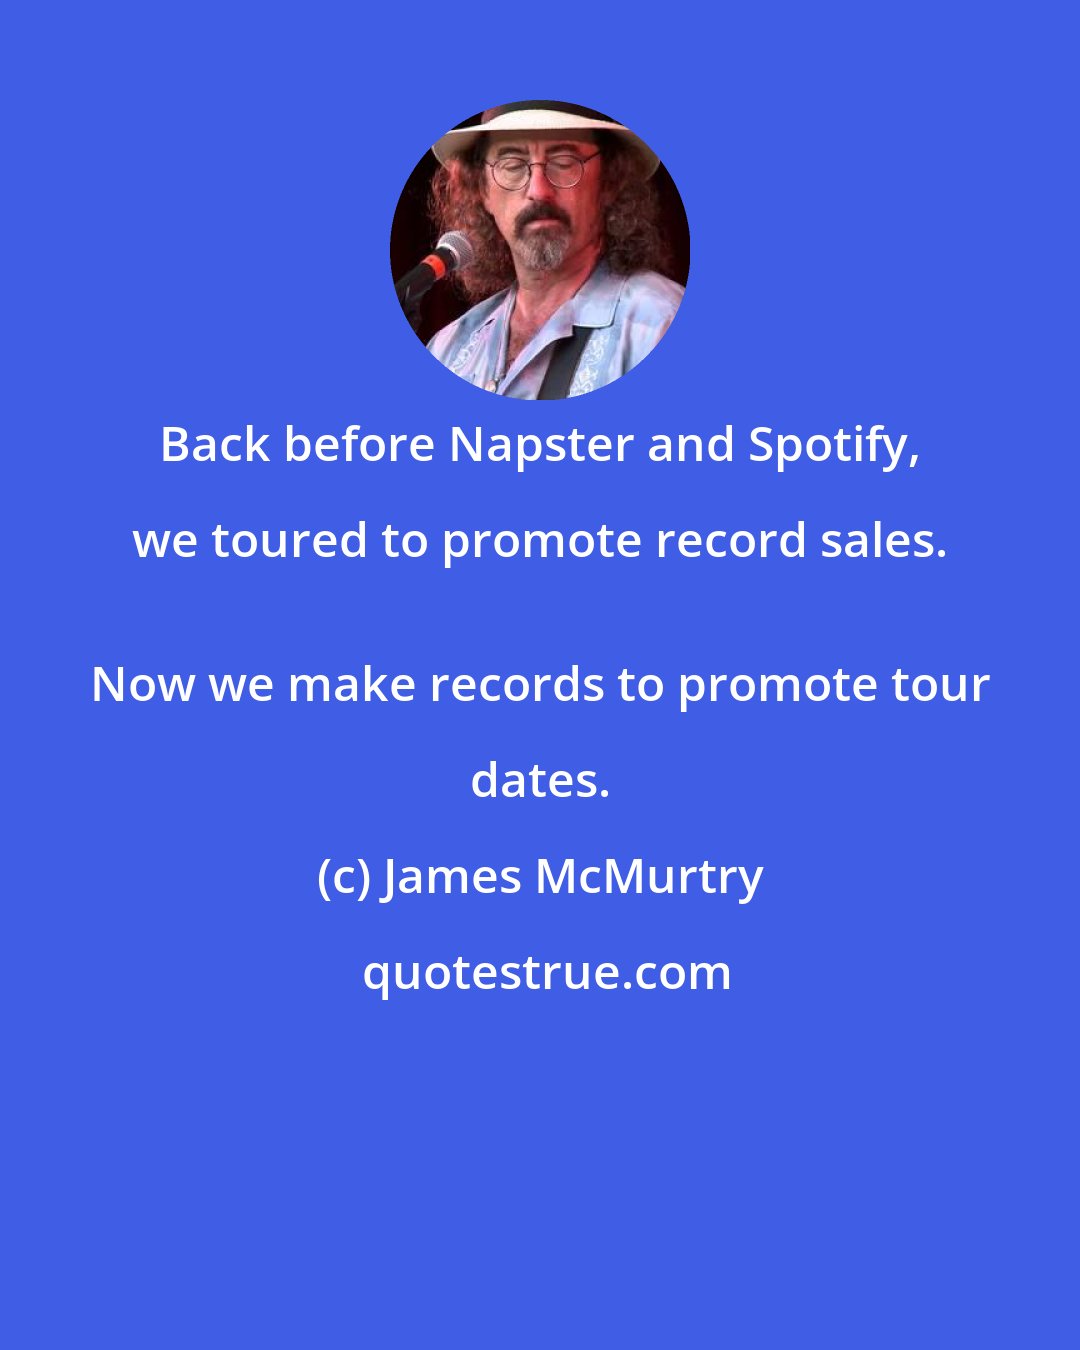 James McMurtry: Back before Napster and Spotify, we toured to promote record sales. 
 Now we make records to promote tour dates.